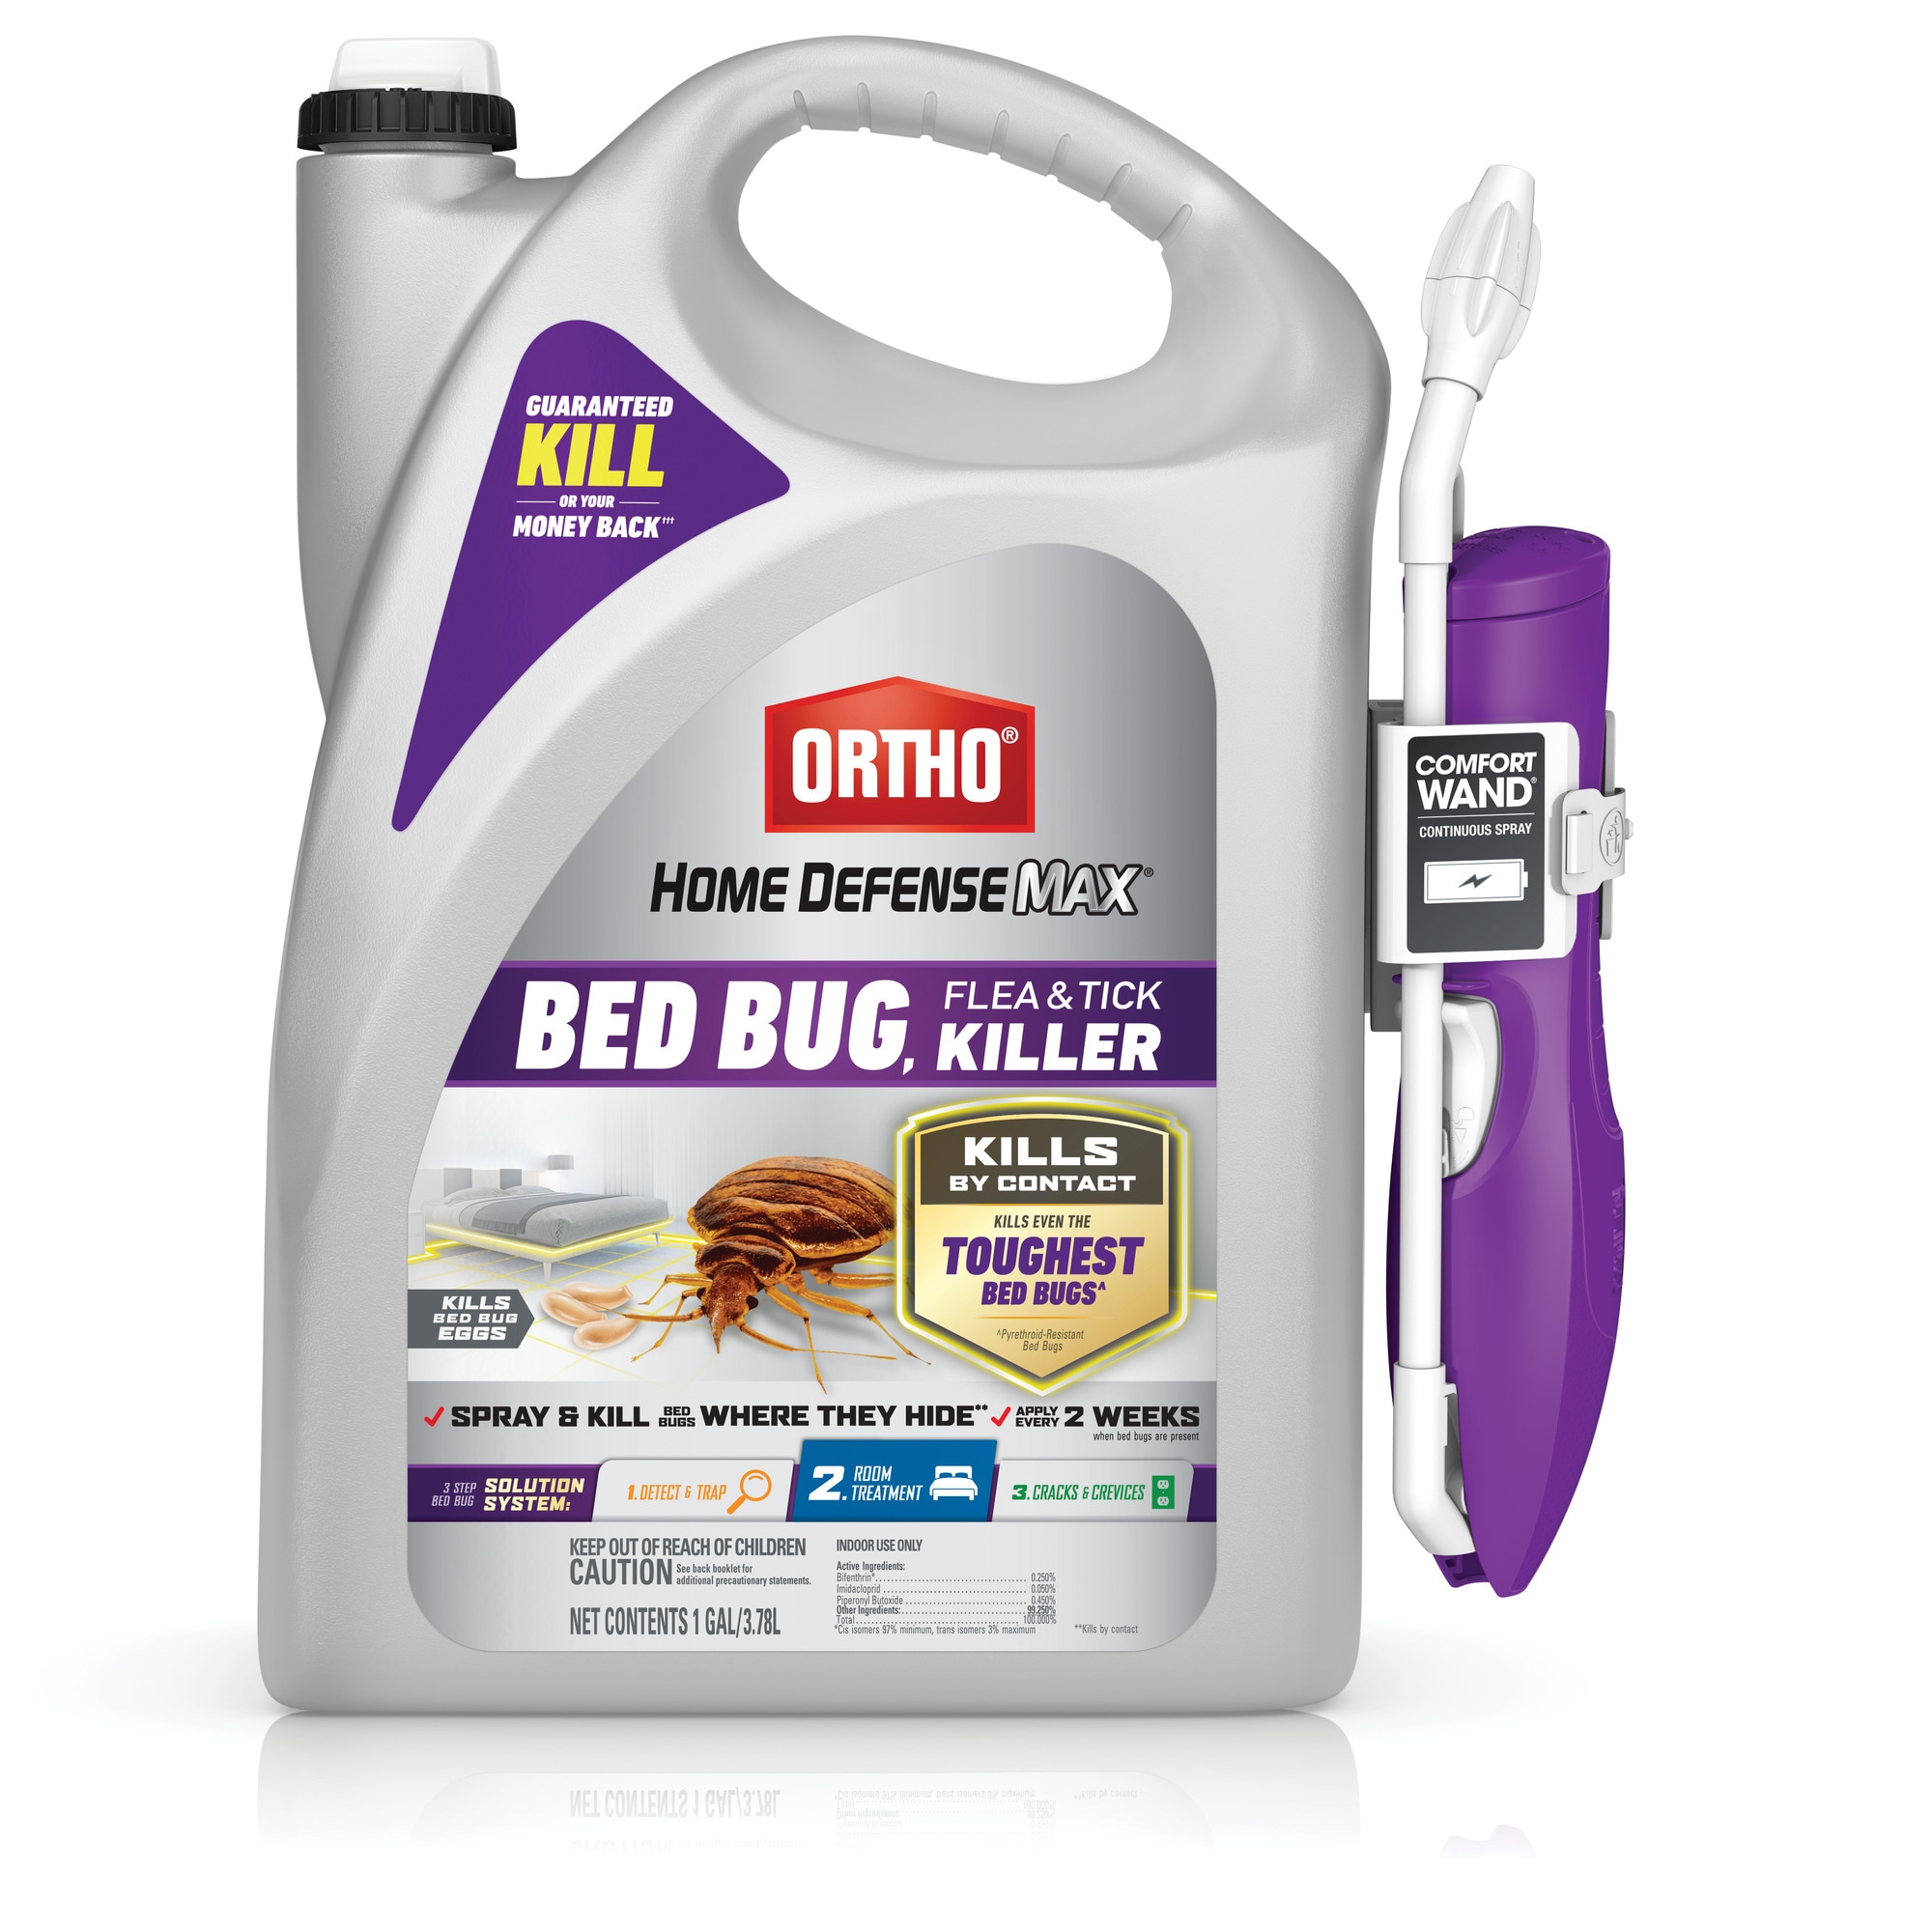 Ortho Home Defense Max 1 Gallon Bed Bug, Kill Bed Bugs Leather Jacket